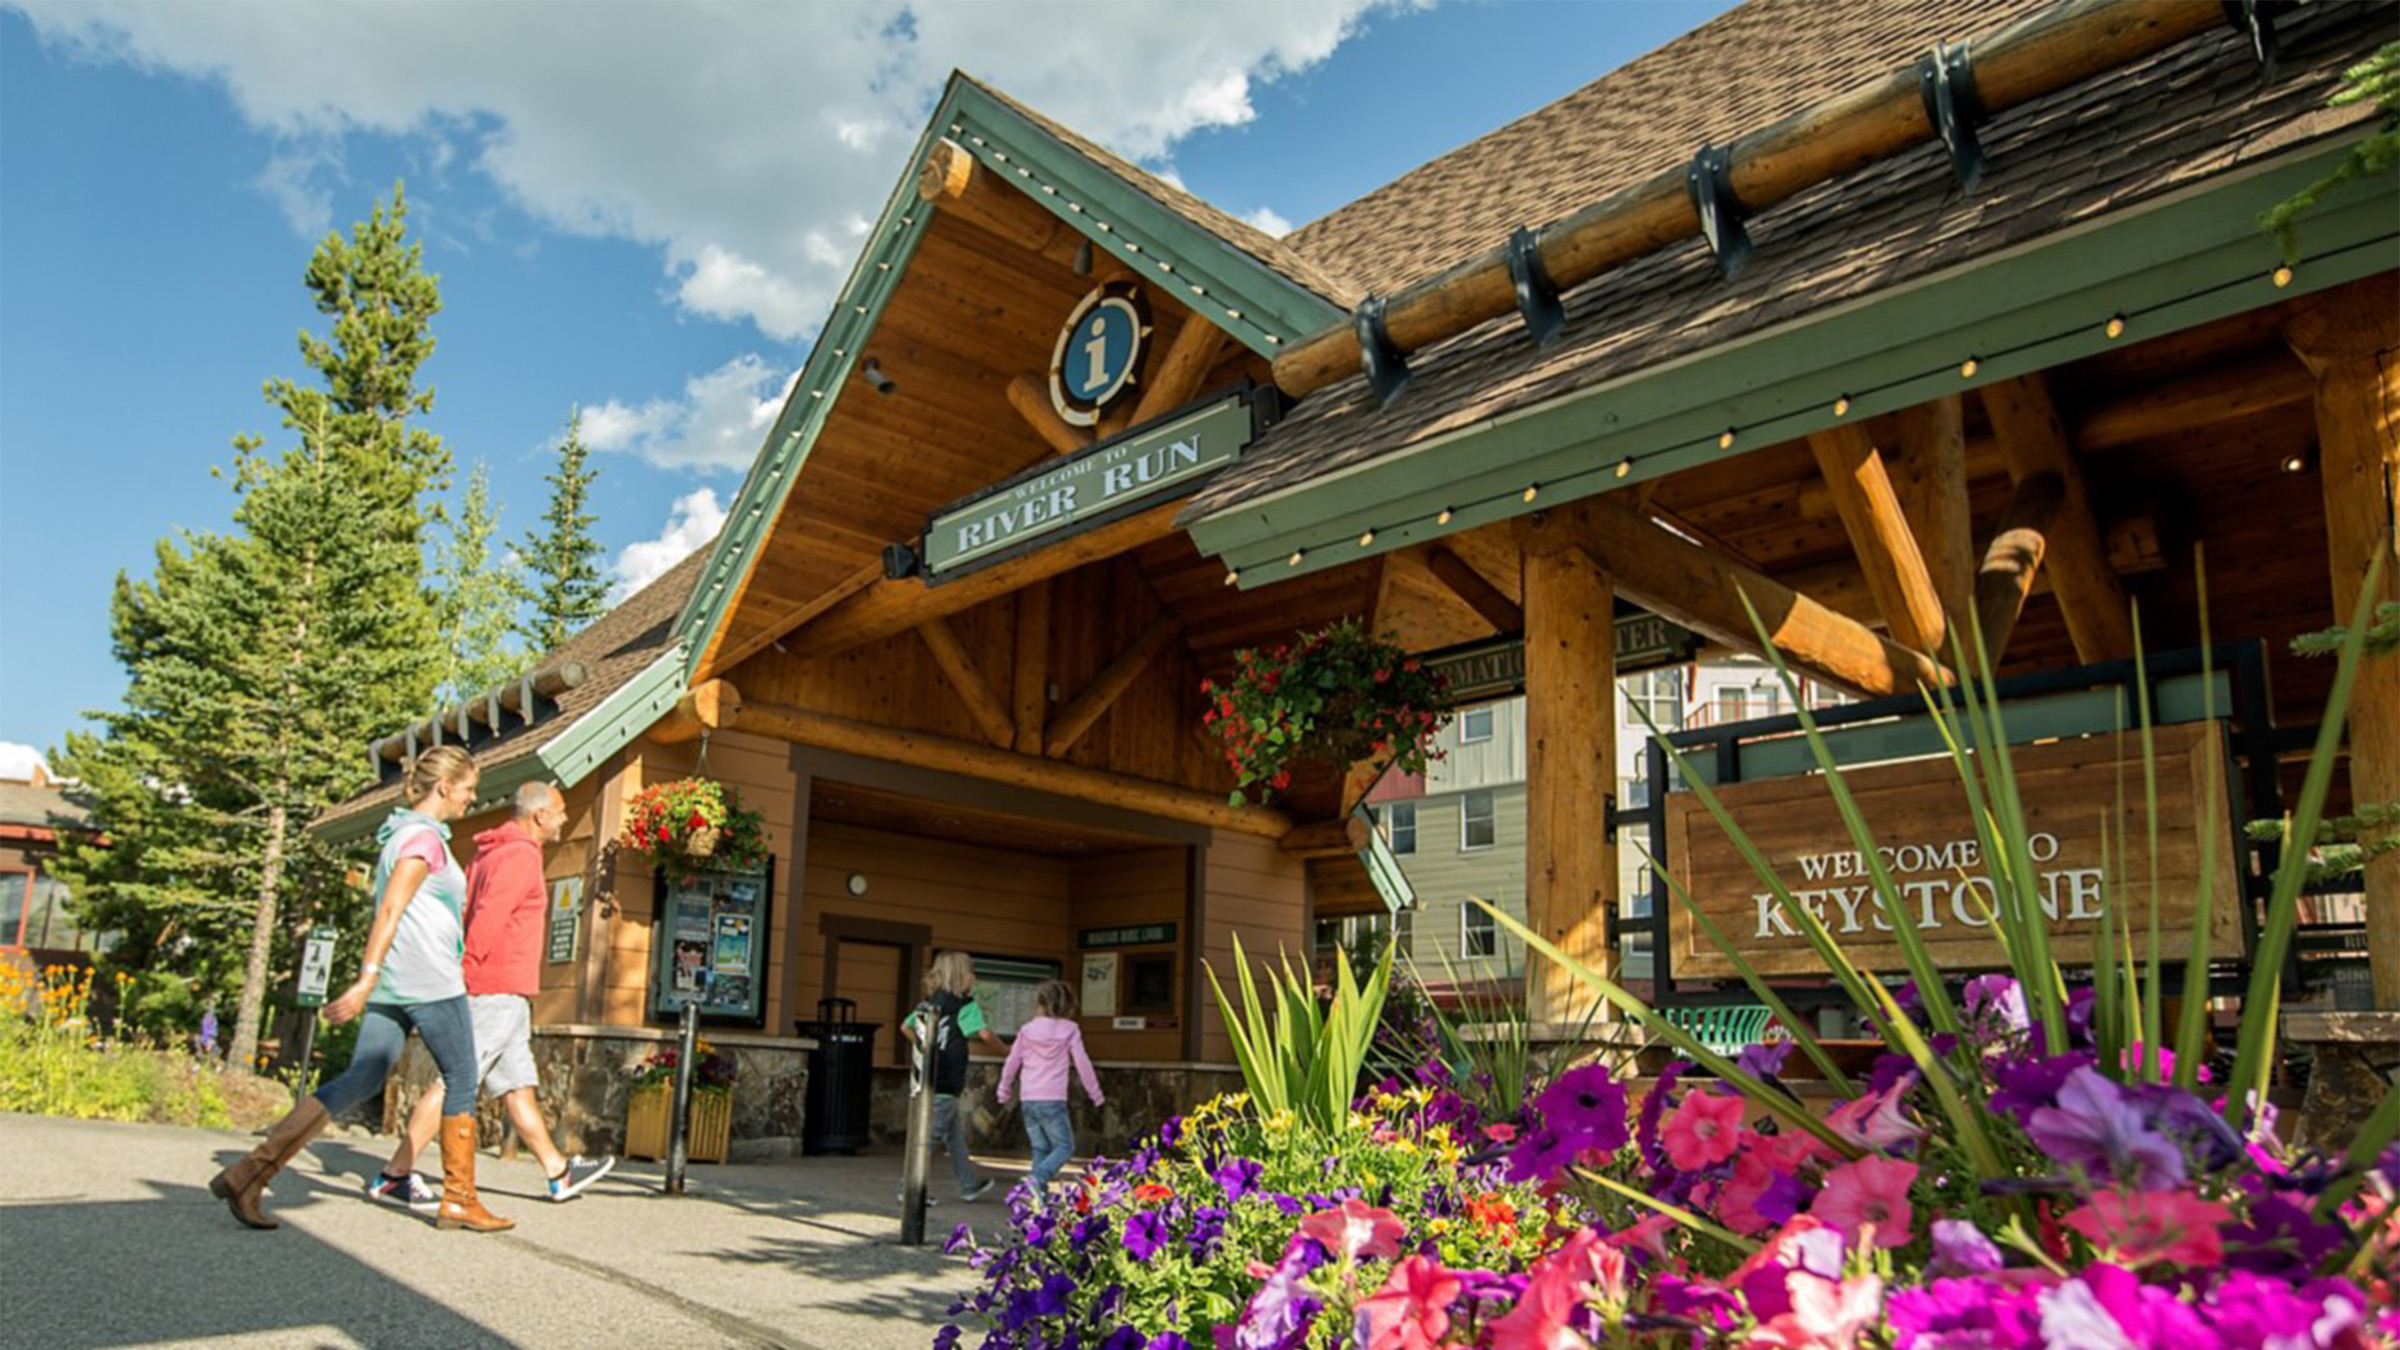 The Village shops, restaurants, and events are a short walk from you front door.